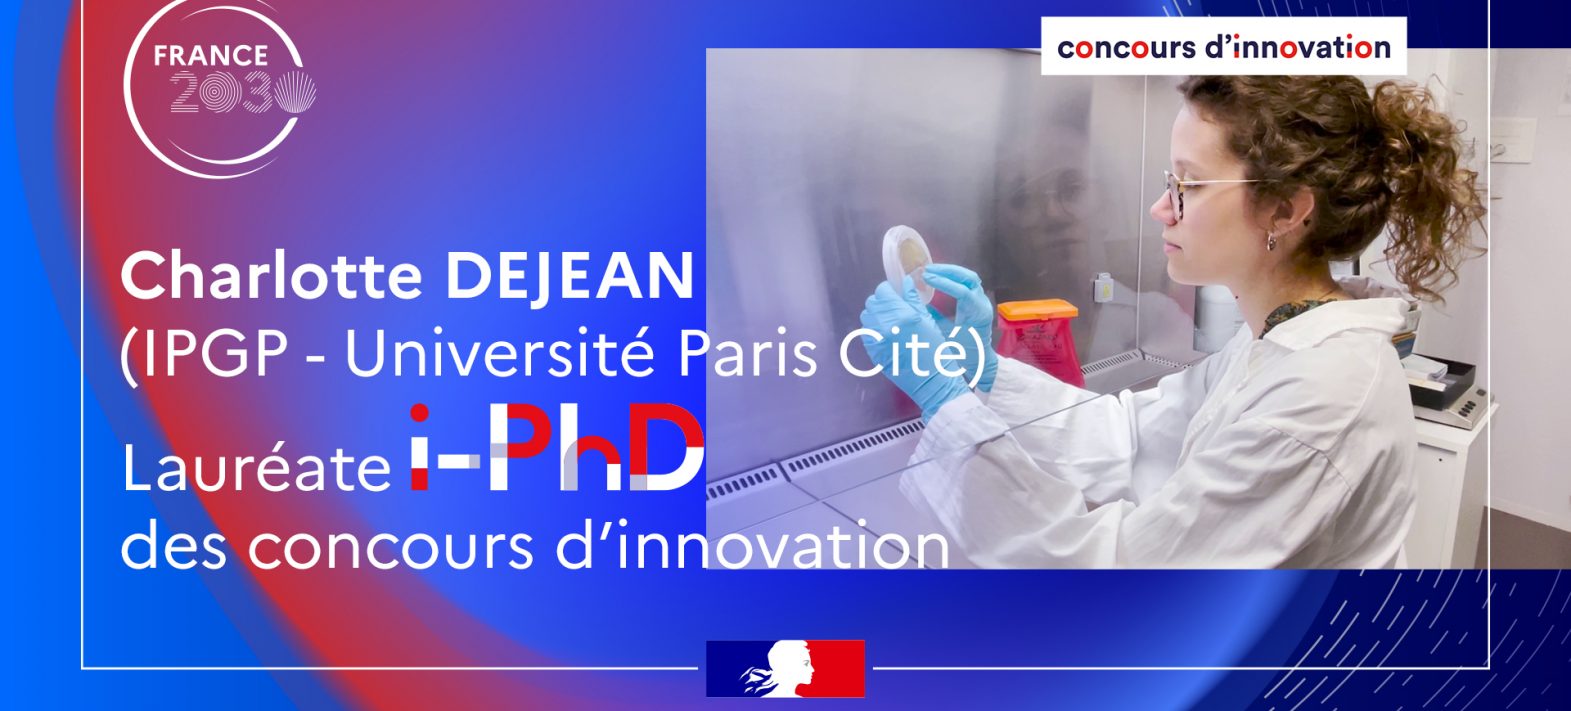 Charlotte Dejean, winner of the 2023 i-PhD innovation competition organised by Bpifrance